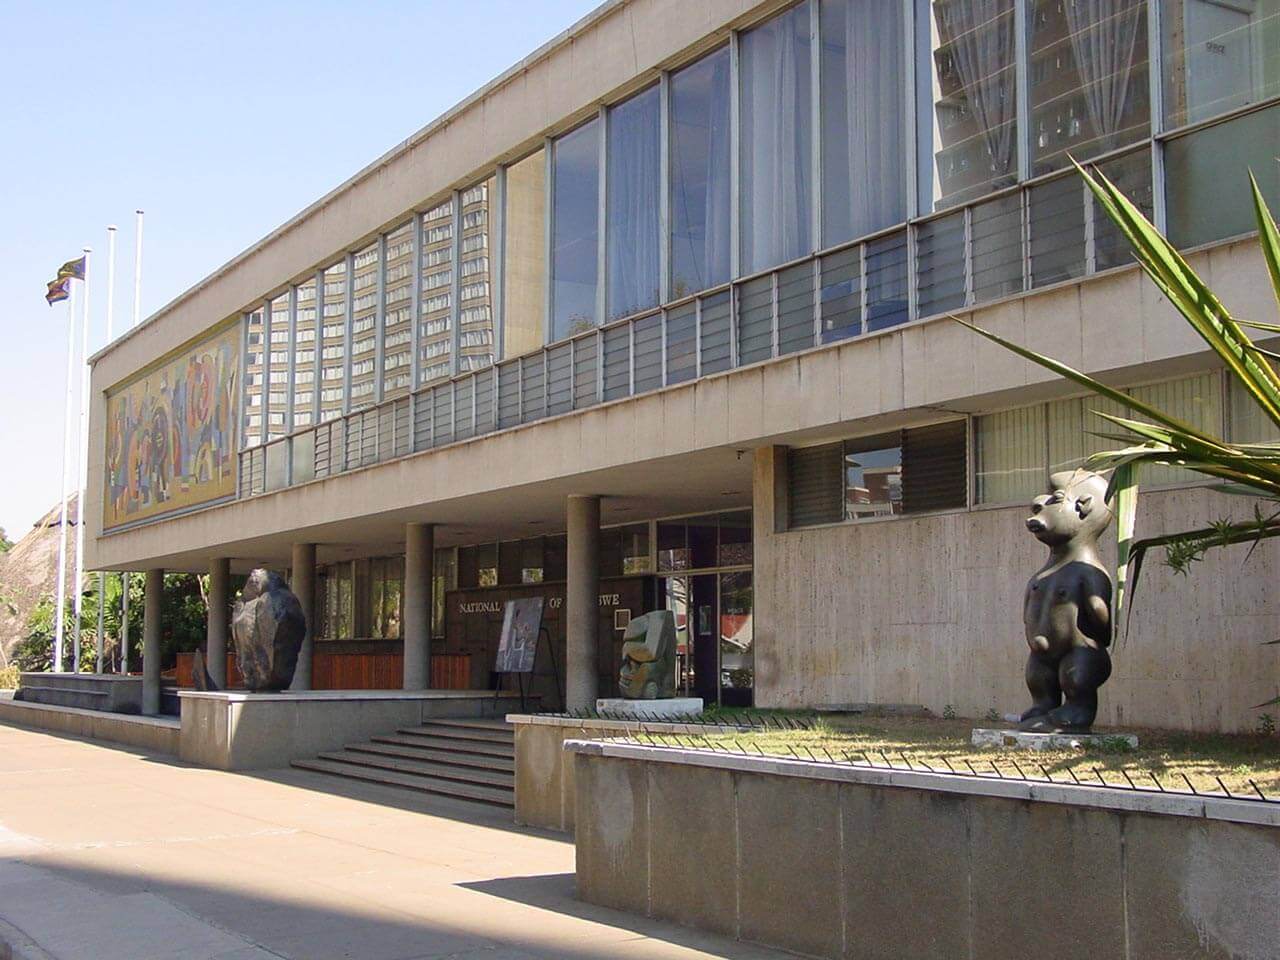 national gallery of zimbabwe building decorated by various sculptures